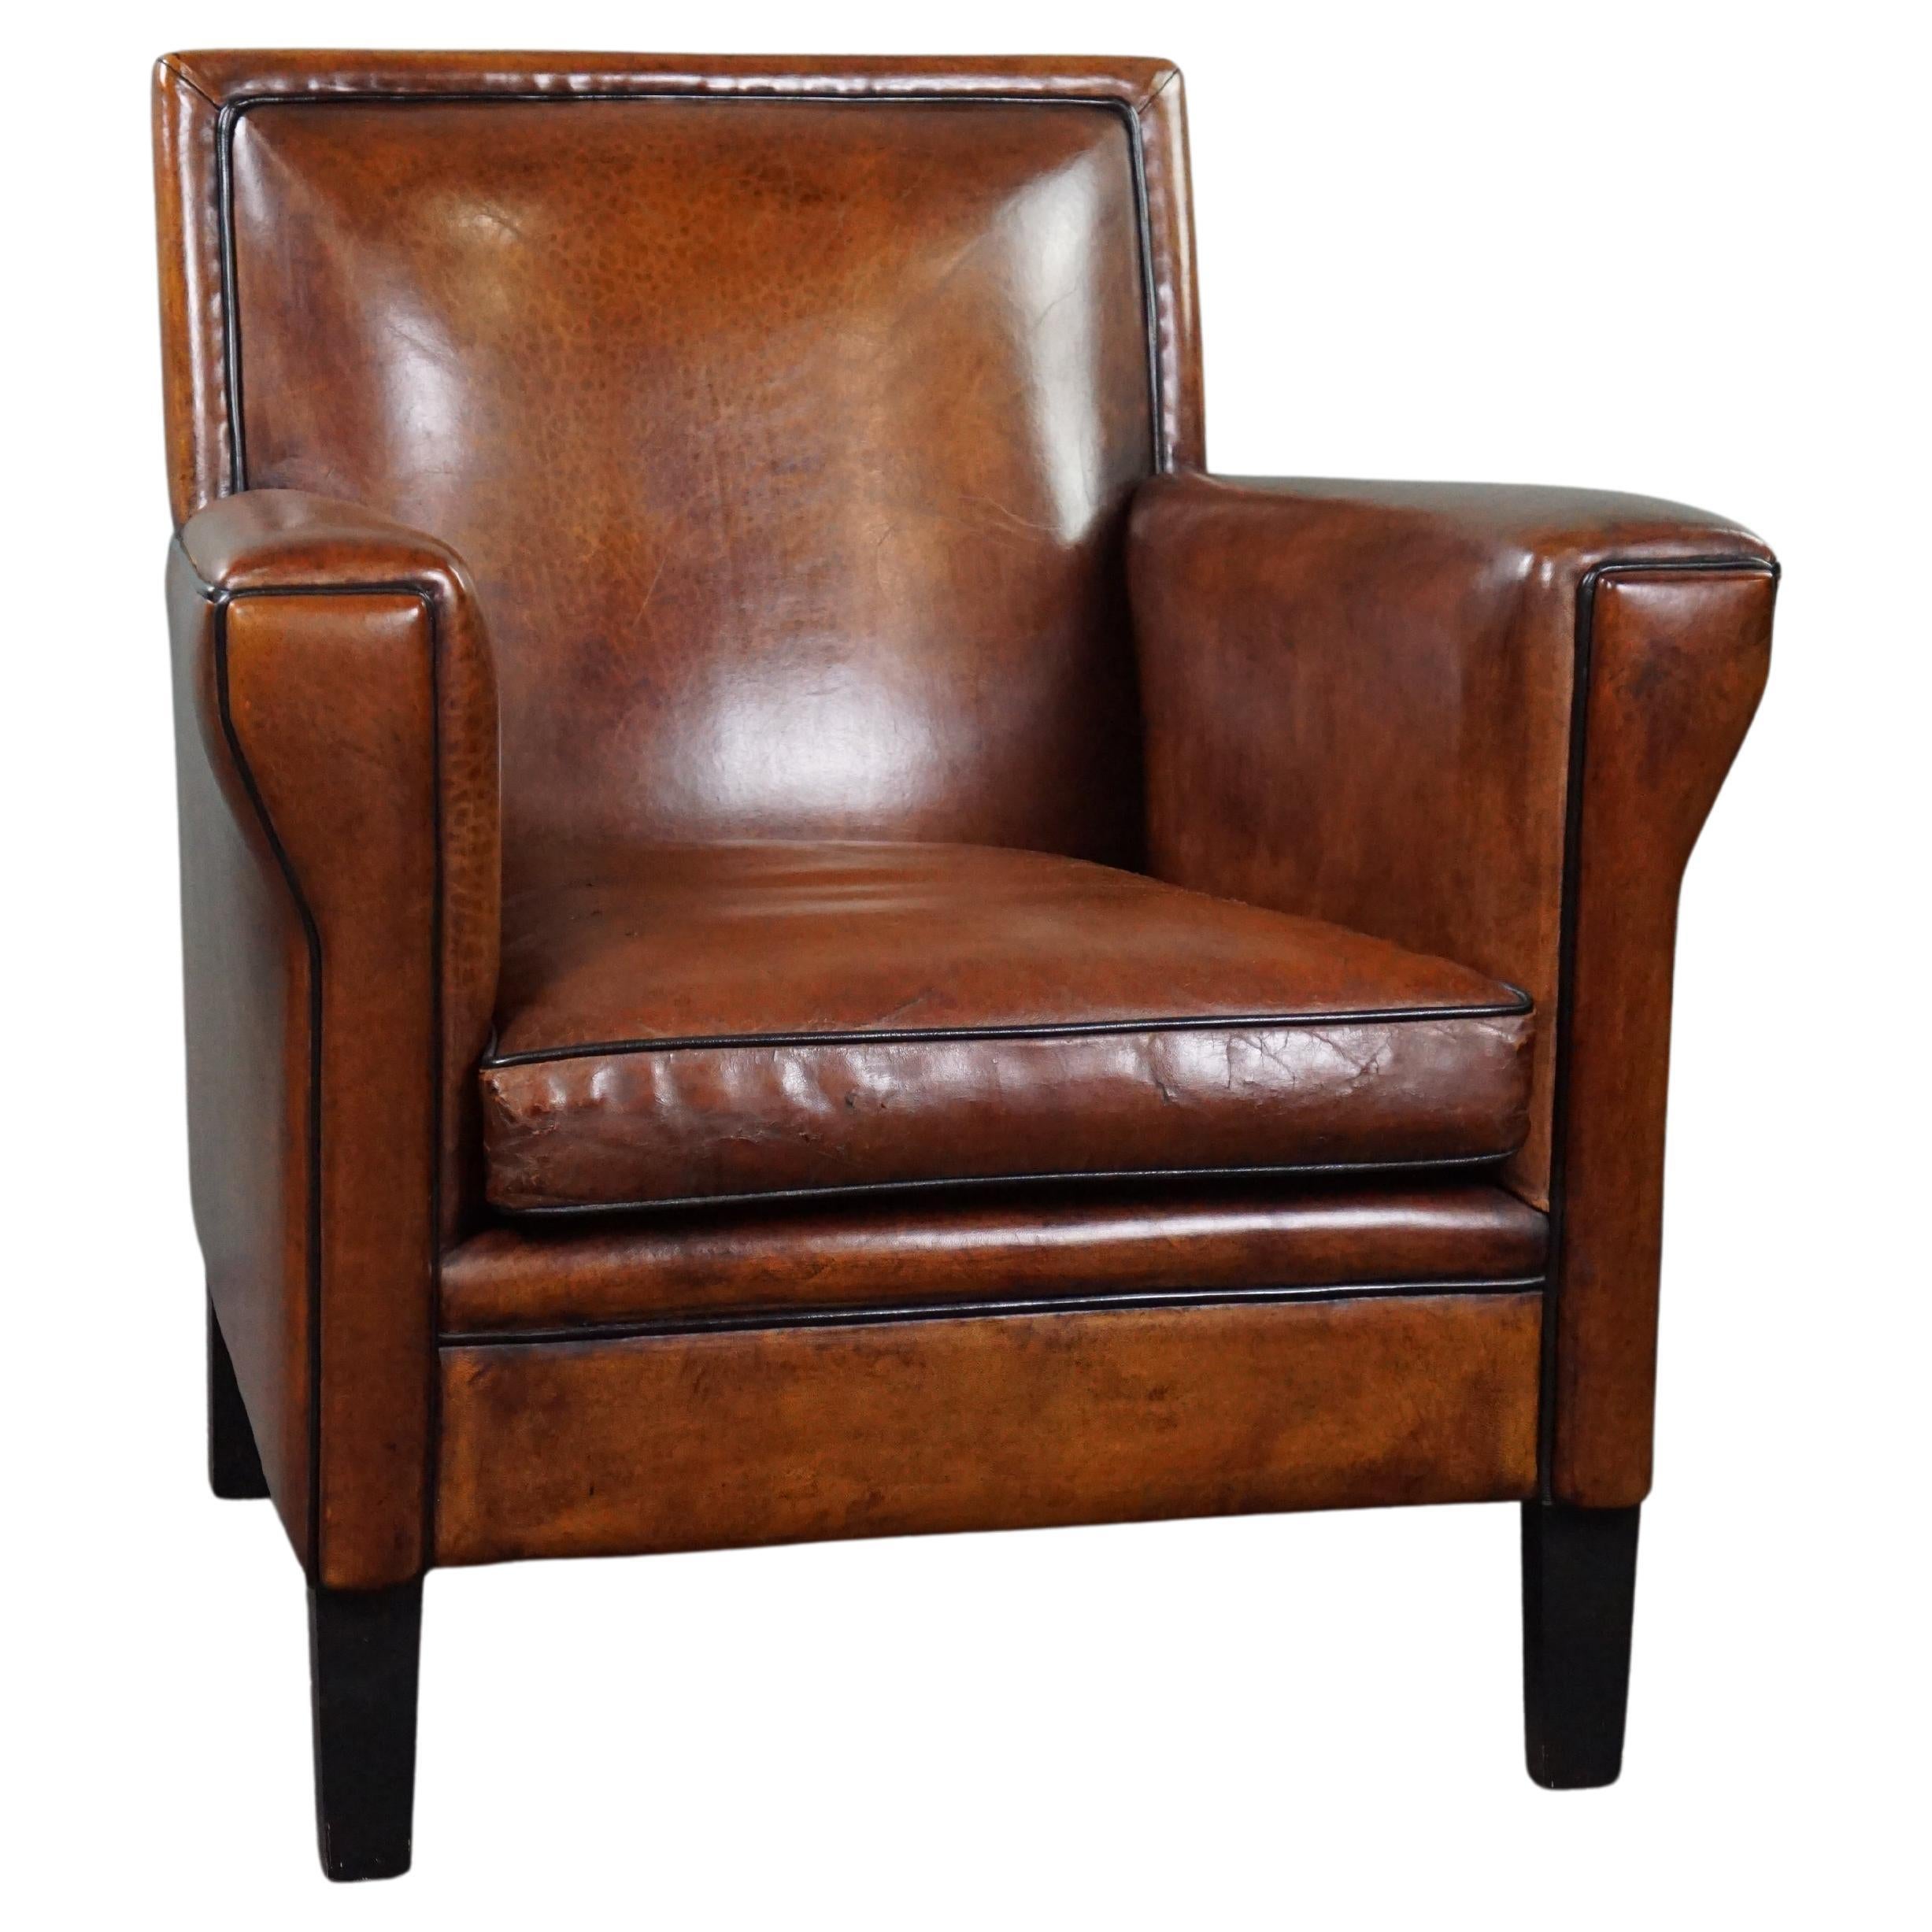 Amazing sheep leather armchair in Art Deco style with warm colors